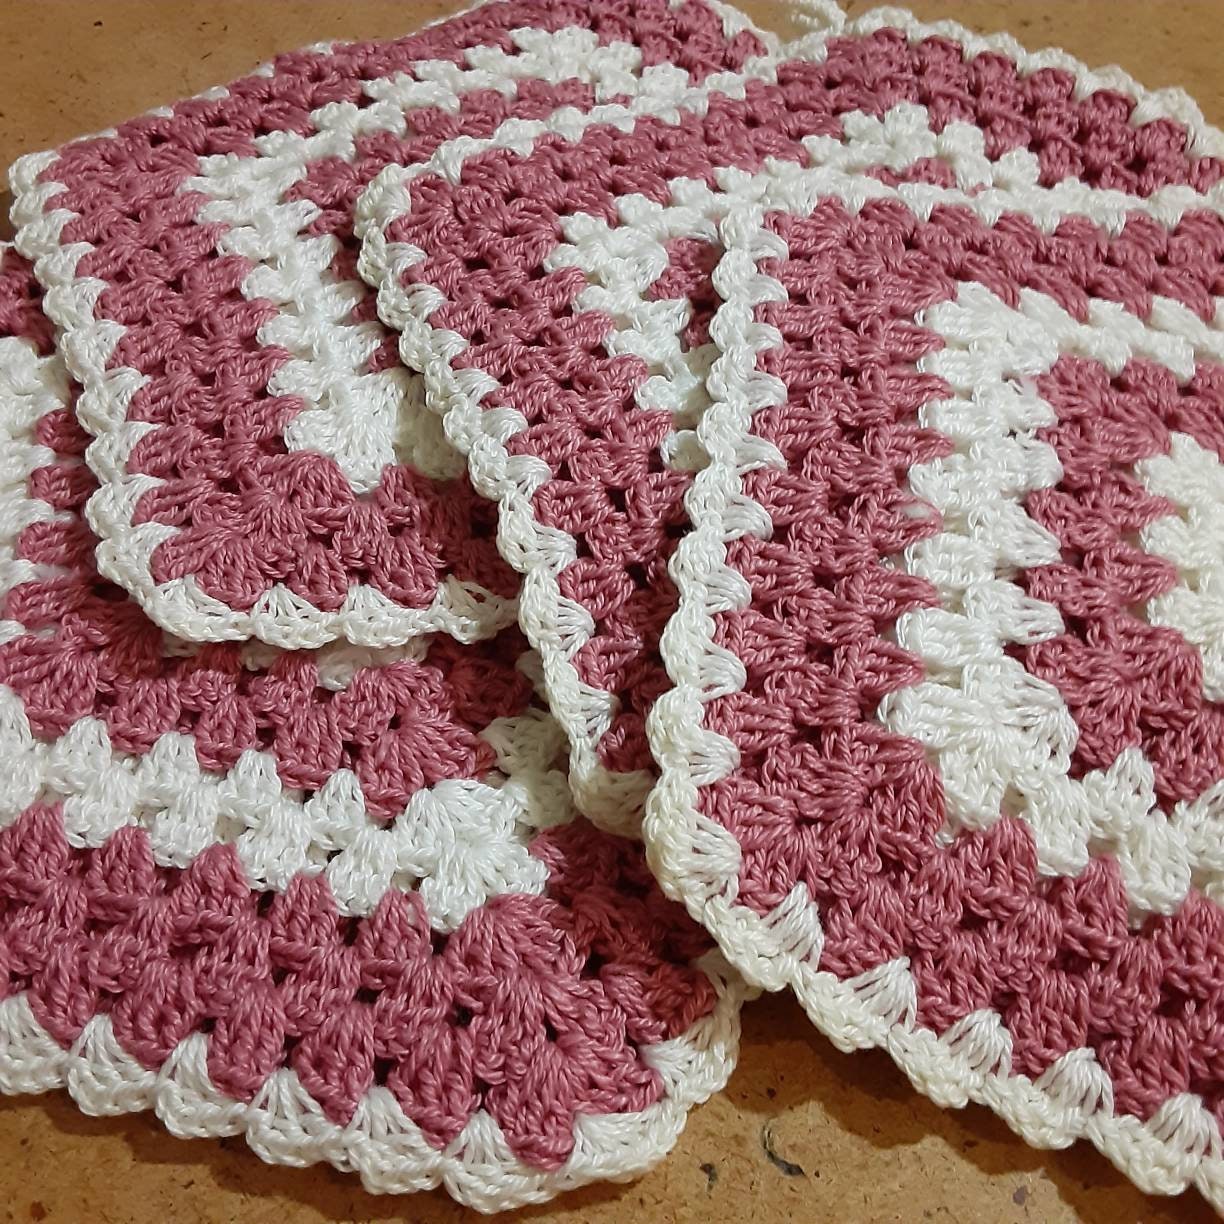 No Right Or Wrong. Two-sided overlay mosaic crochet